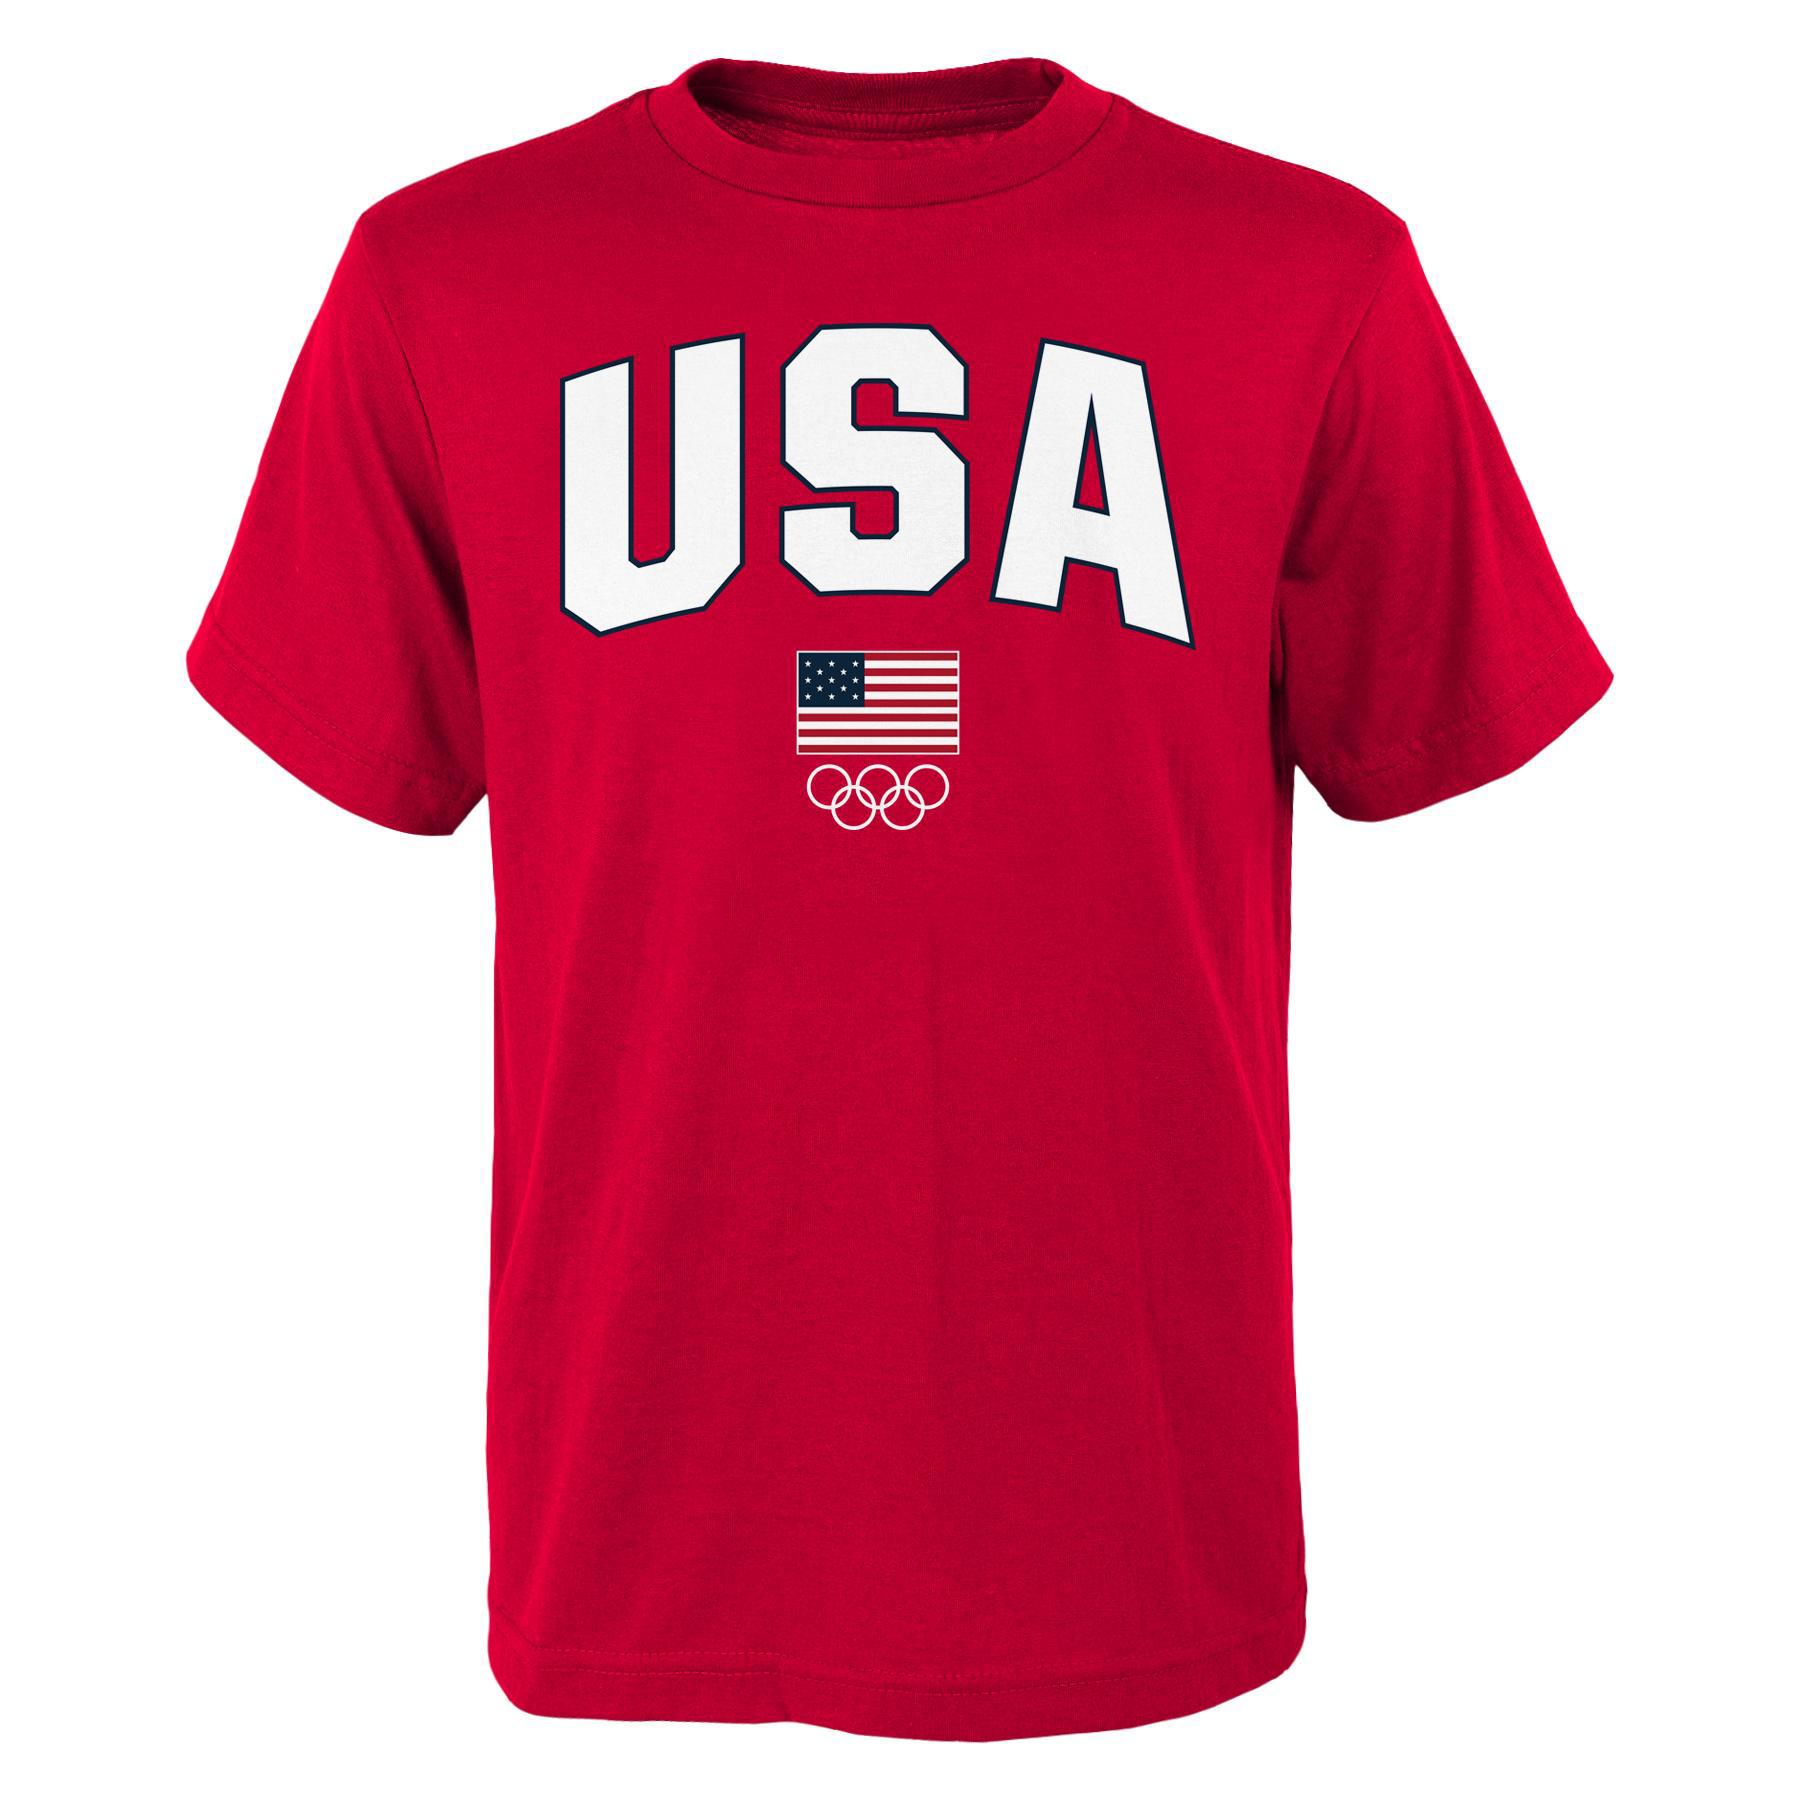 Boy's Olympic Games Graphic T-Shirt - USA